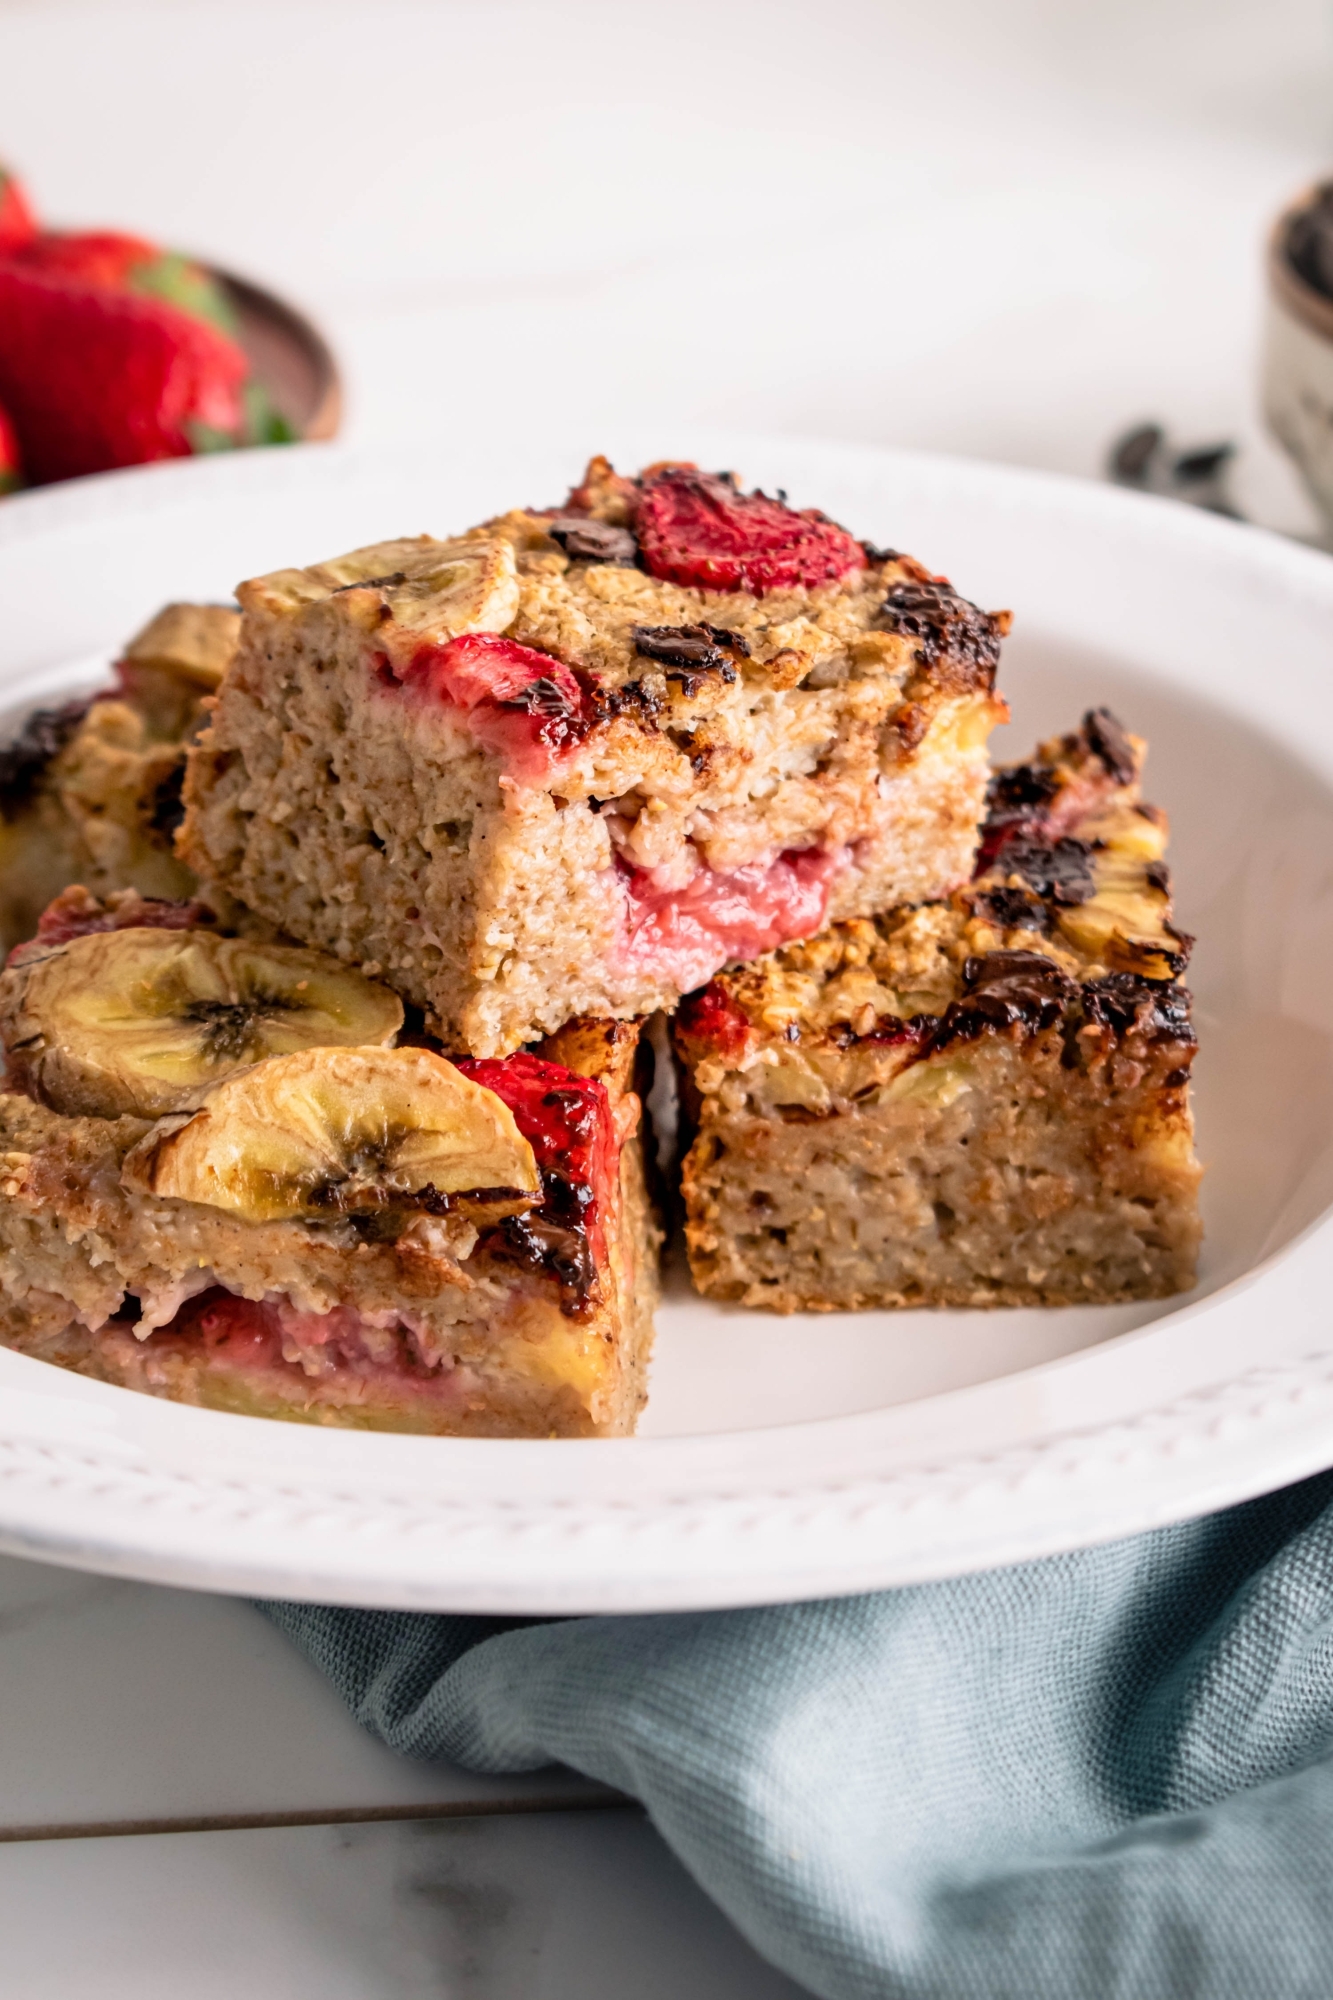 Strawberry baked oatmeal with banana and chocolate chips cut into squares and placed on a white plate.